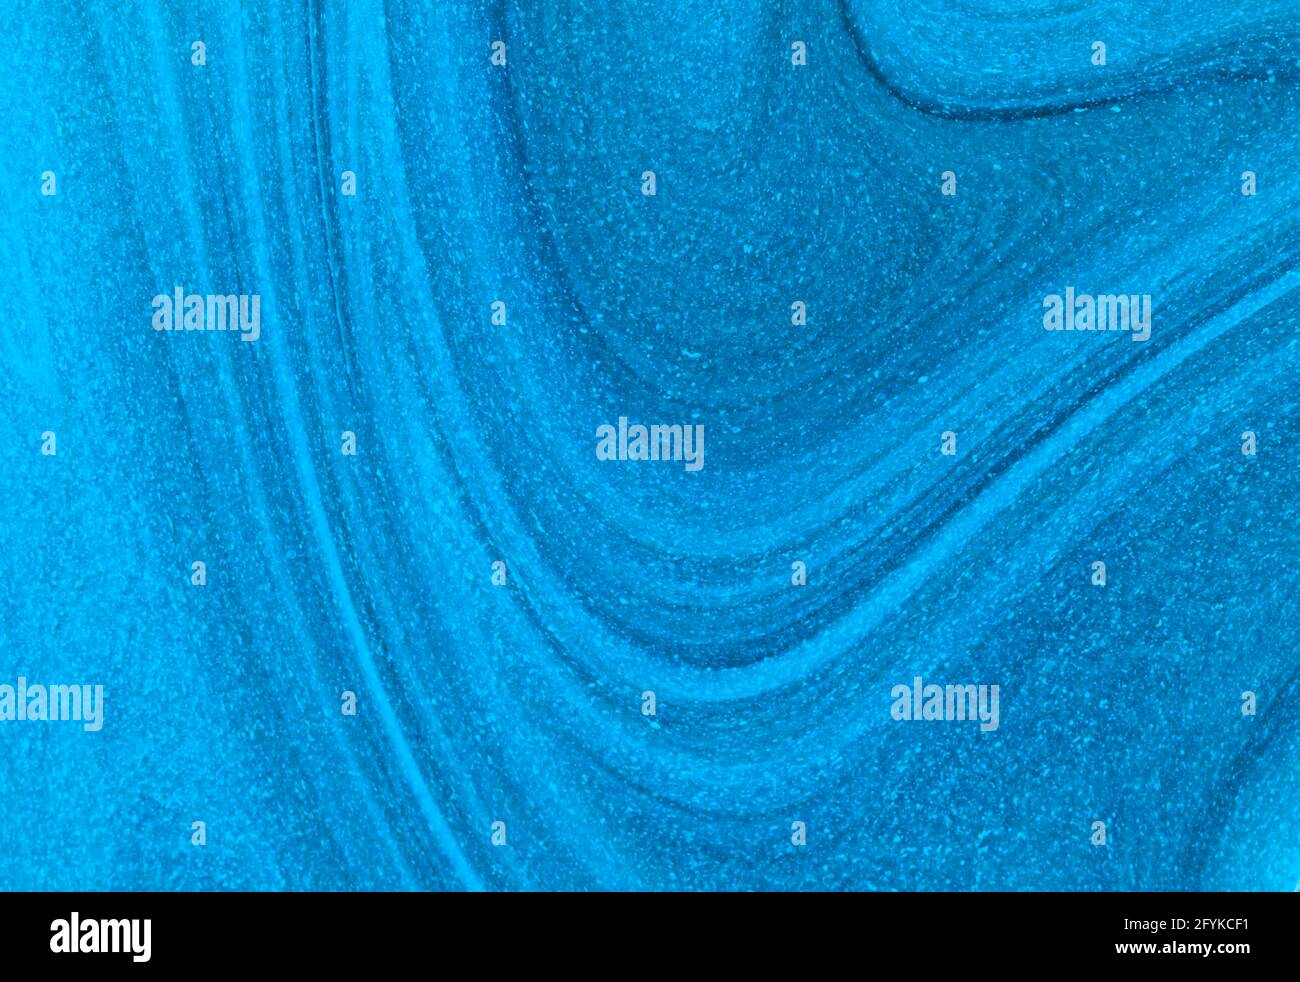 Abstract Blue Paint Swirling with Speckles Stock Photo - Alamy